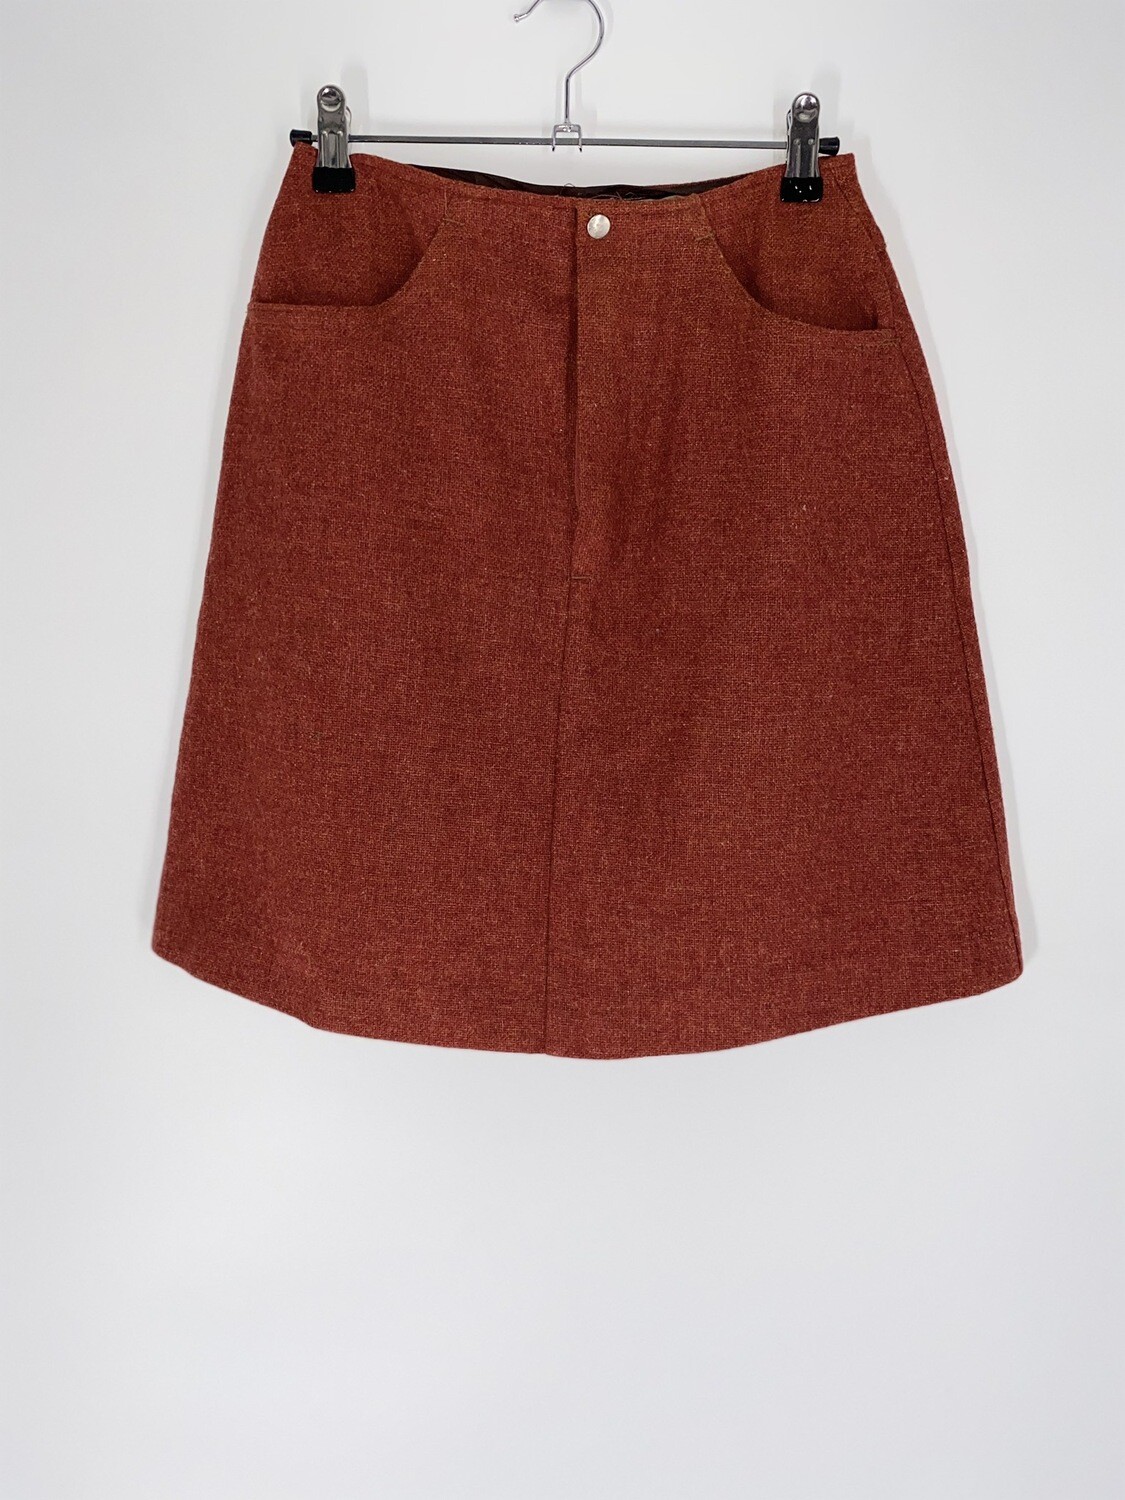 Brick Red Skirt Size S